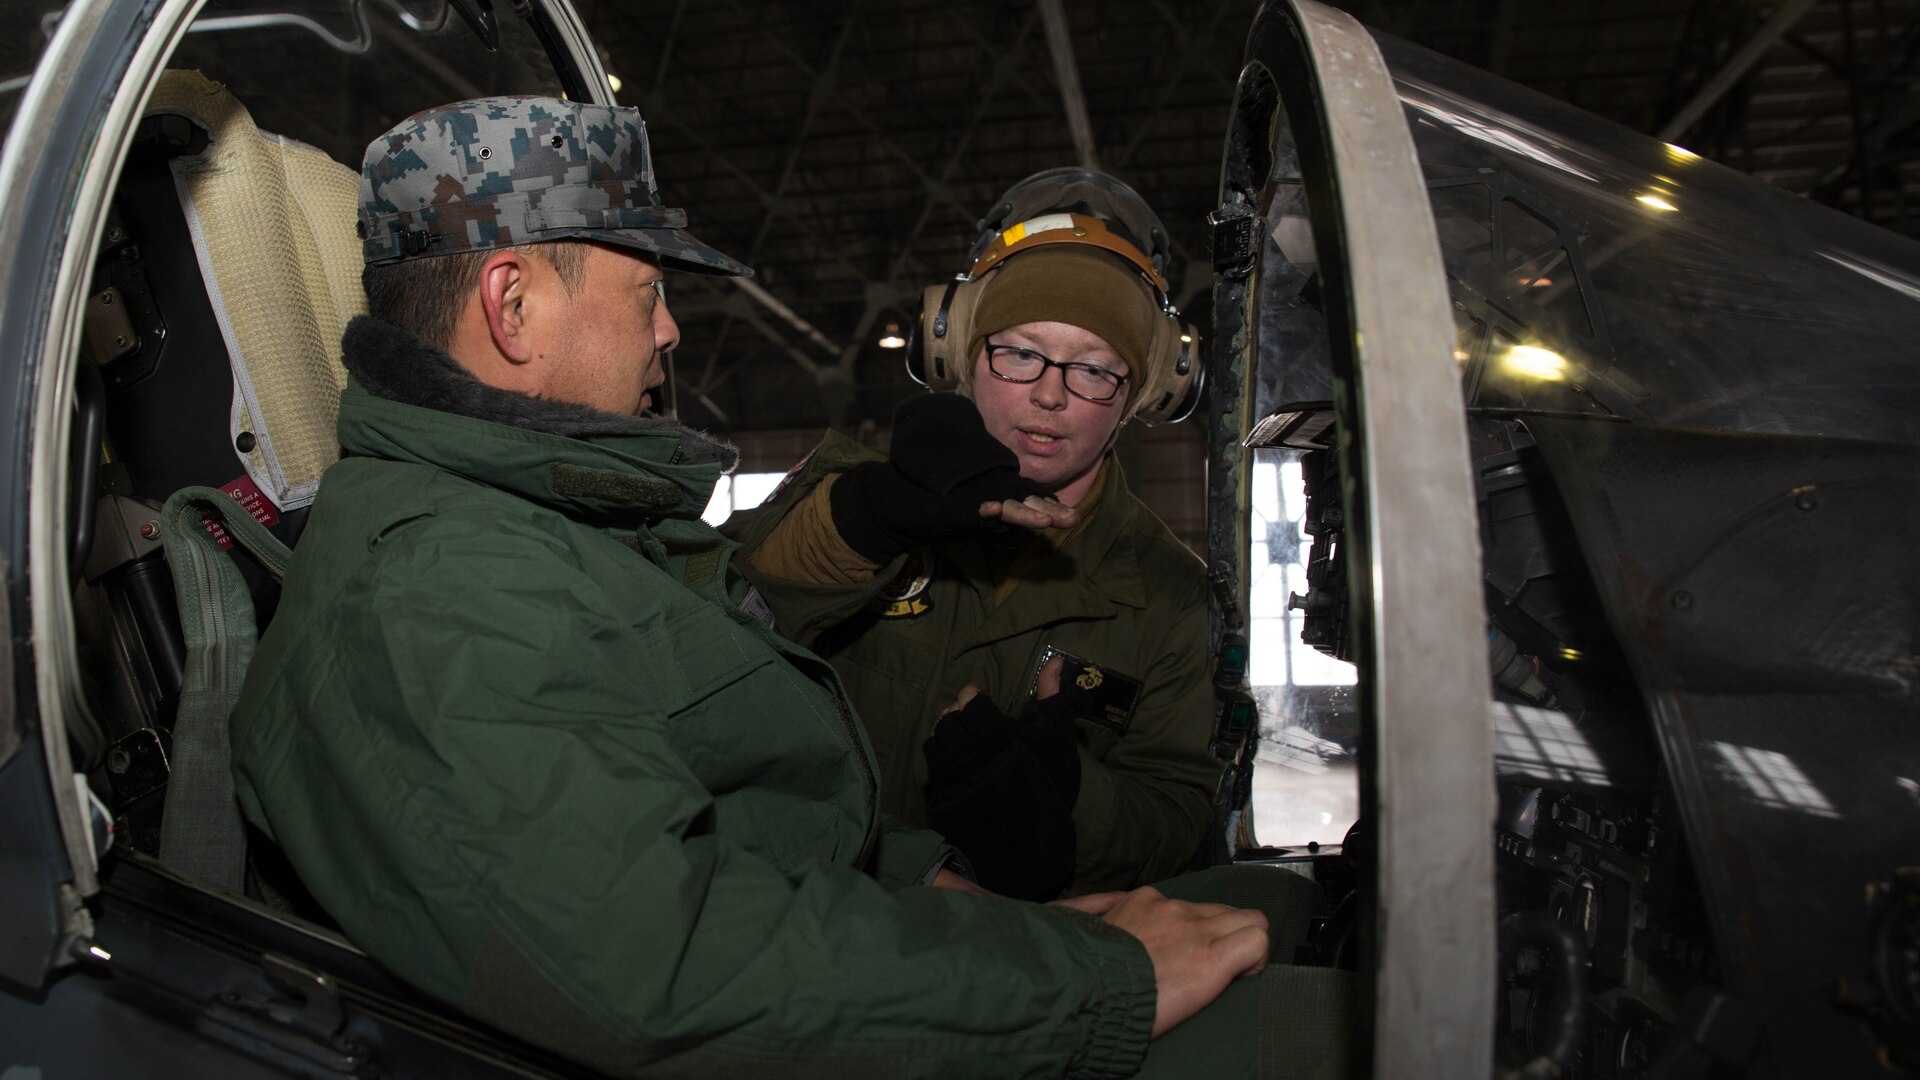 U.S. Marine Corps Lance Cpl. Jasaon Breker, a power line technician with Marine Attack Squadron (VMA) 542, explains how an AV-8B Harrier’s controls work inside the cockpit to a member of the Japan Air Self Defense Force at Chitose Air Base, Japan, Dec. 9, 2016. JASDF personnel joined the VMA-542 Marines in their hangar to get a closer look and better understanding of the squadrons Harriers. (U.S. Marine Corps photo by Lance Cpl. Joseph Abrego)